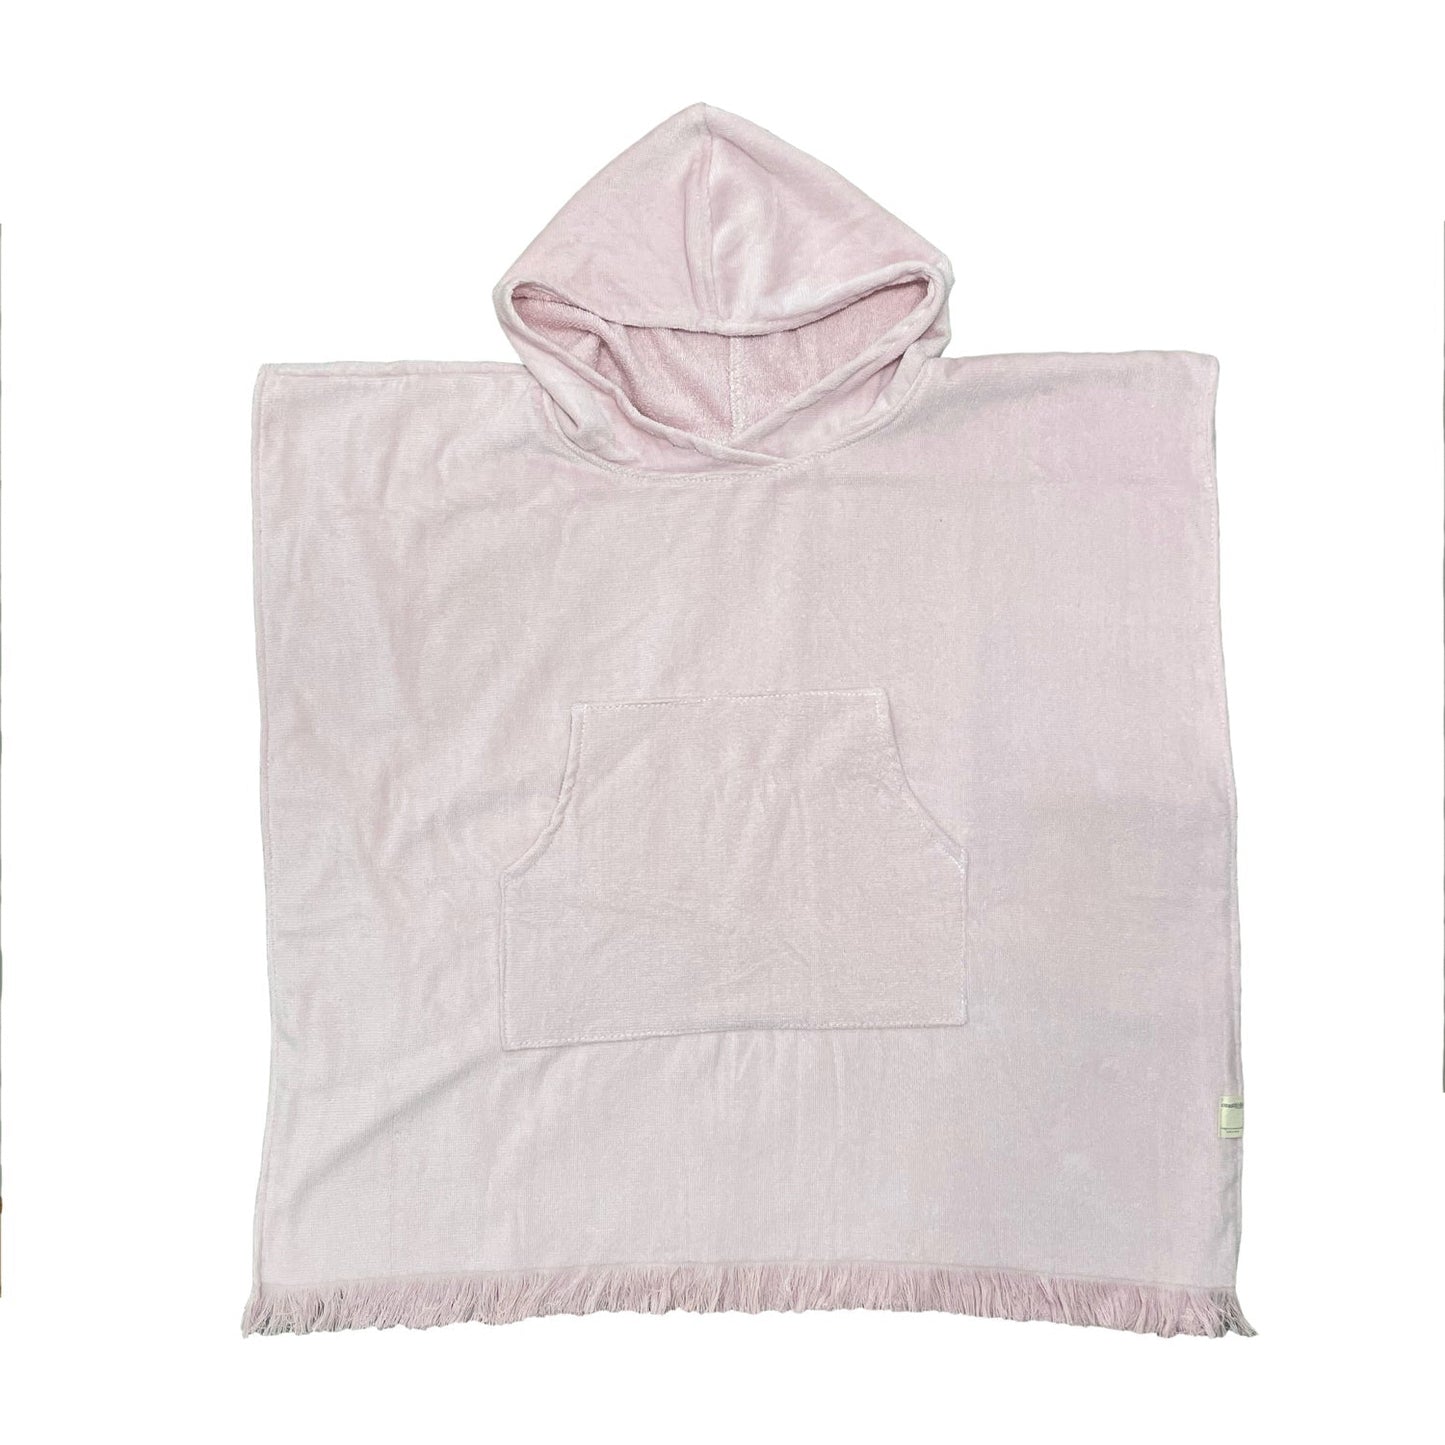 Busselton Hooded Beach Towel | 5-7 Years (70 x 70) / Pink - Muddy Boots Home UK